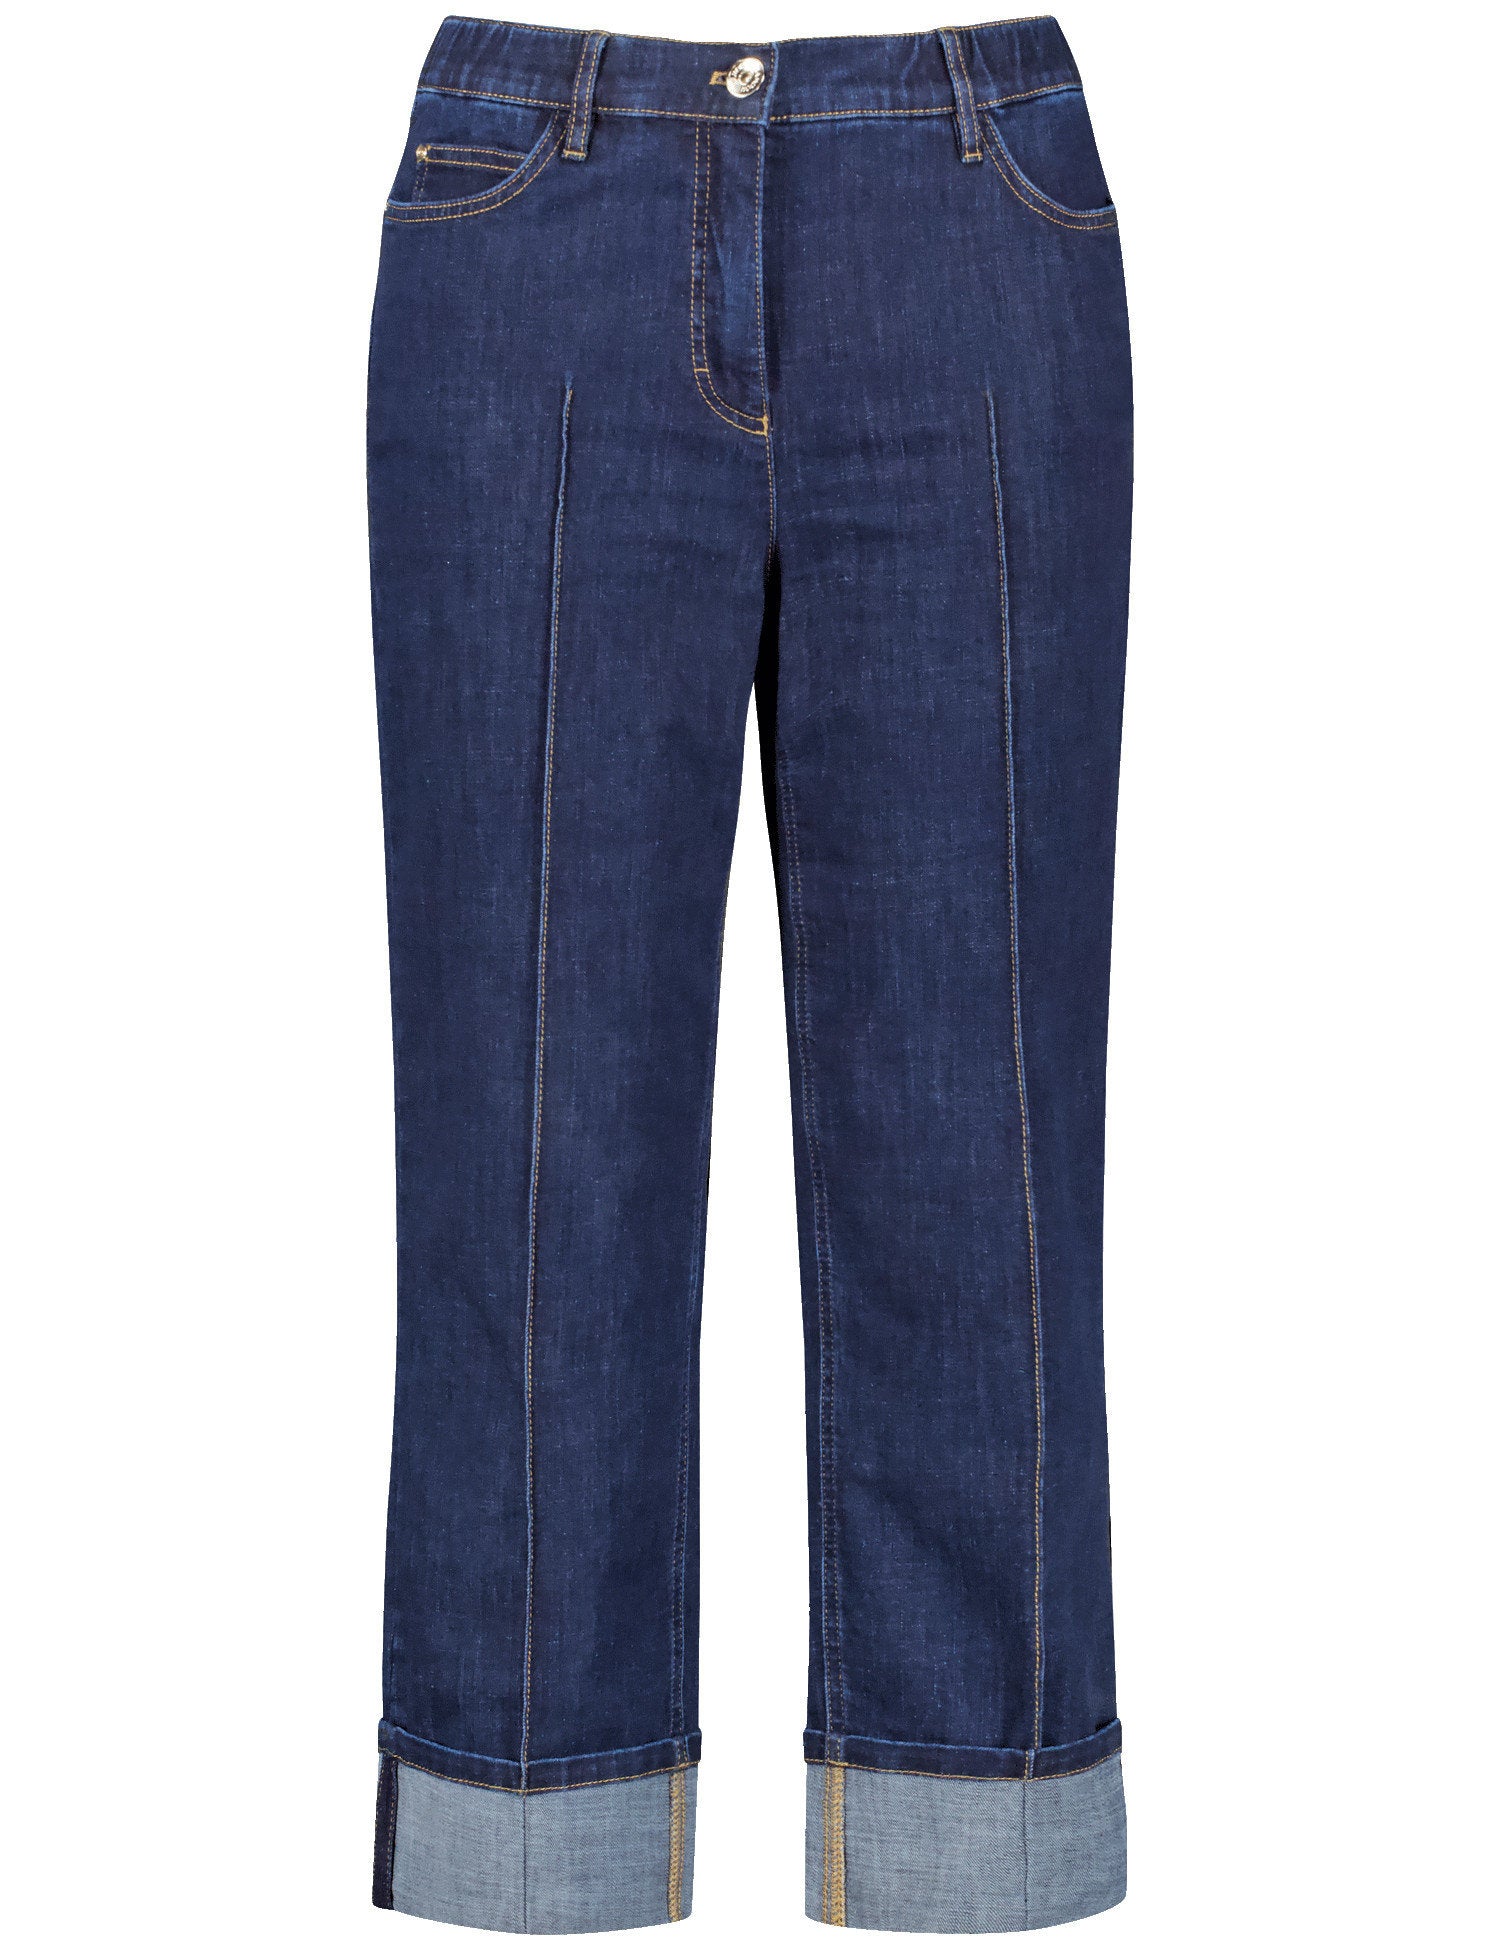 7/8-Length Jeans With Contrasting Topstitching_420039-21402_8999_02